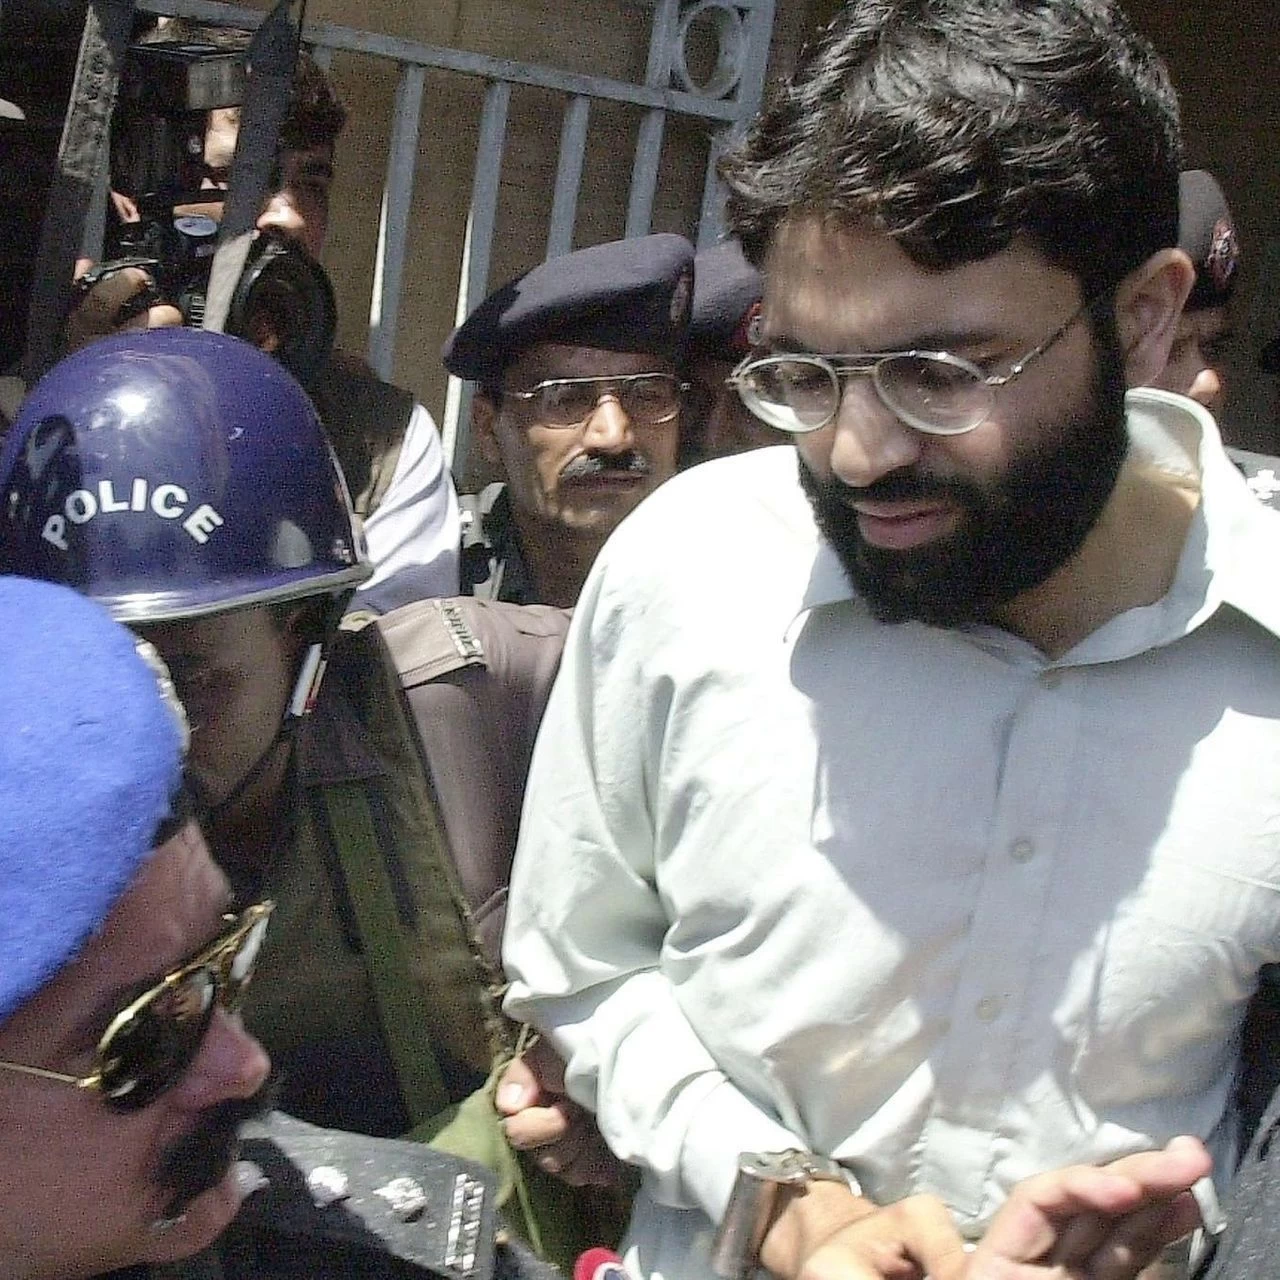 Daniel Pearl case: SC allows shifting Omer Saeed Shaikh to Lahore’s Lakhpat Jail